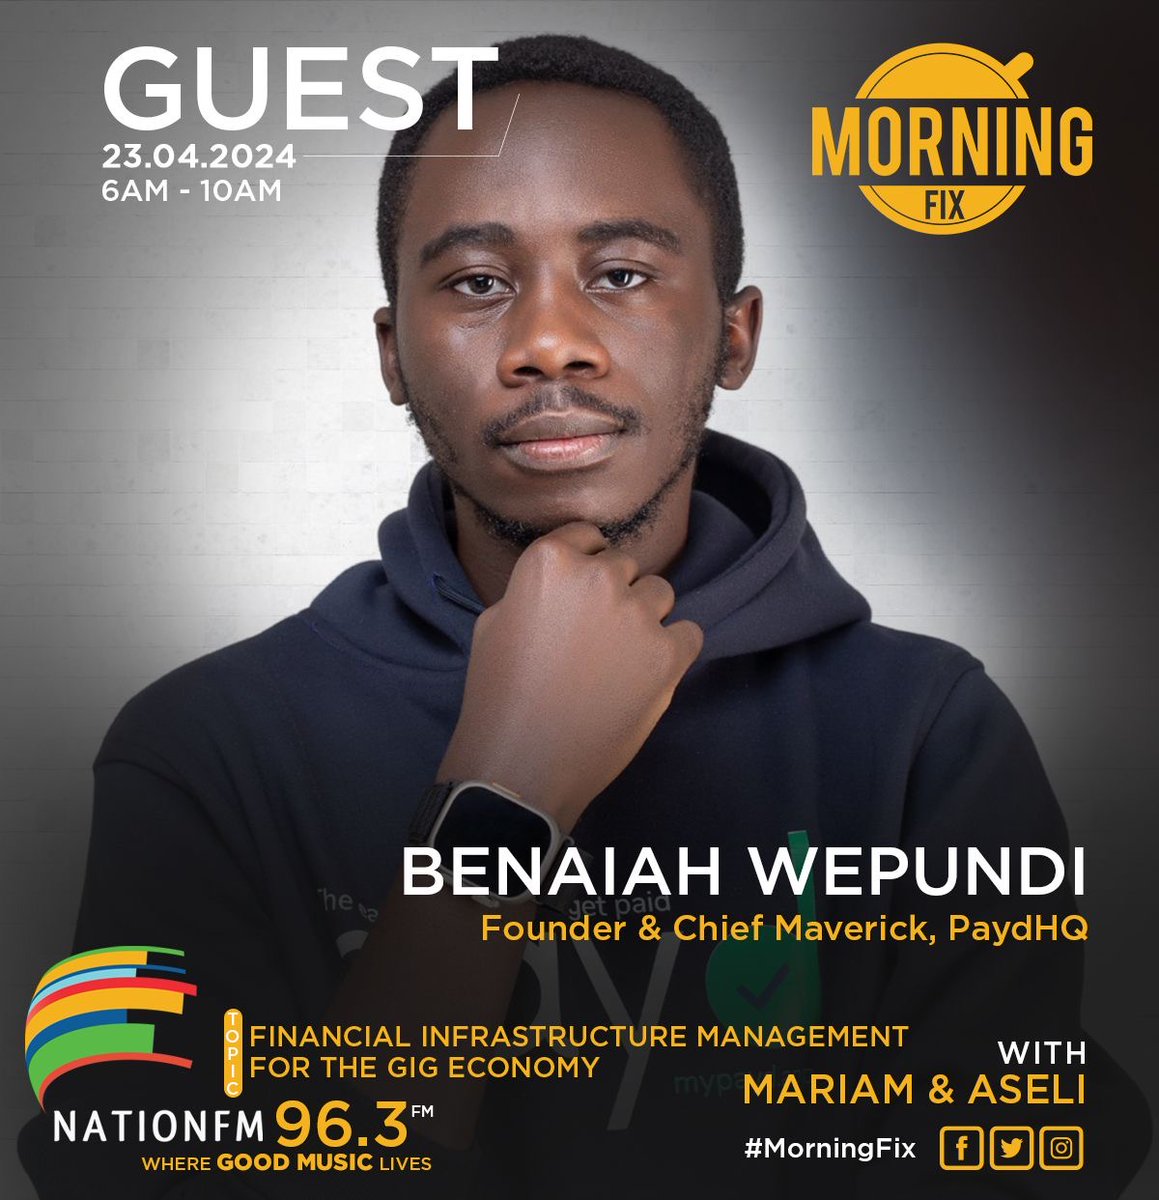 Let's dive into the world of money and tech with @b3npayd! #MorningFix @brian_aseli x @MariamBishar